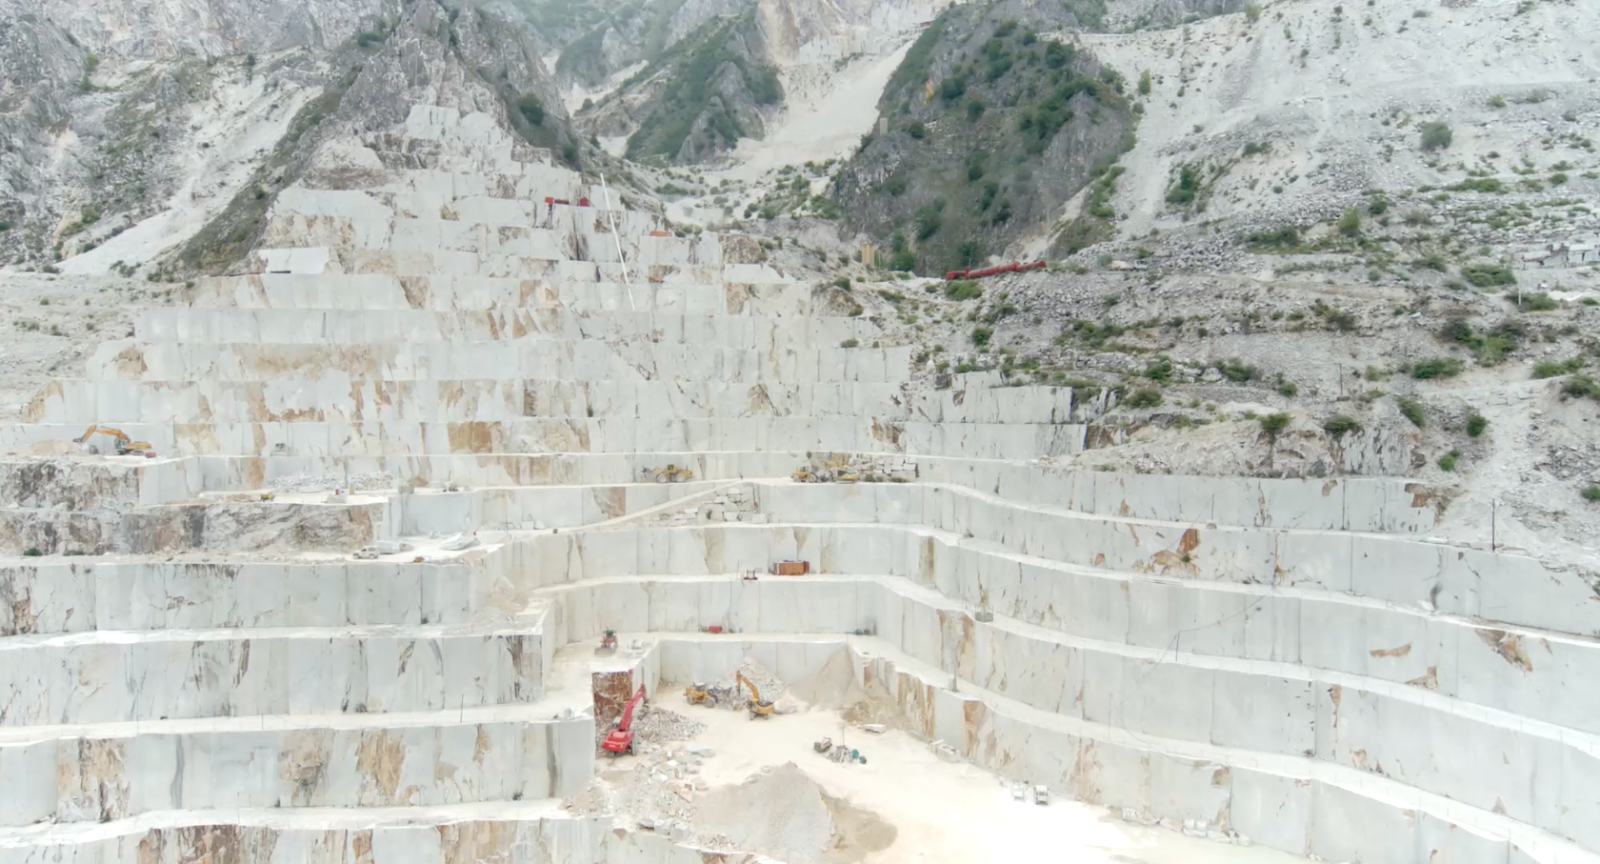 Marble quarry, Carrara, Italy, from the documentary film Earth